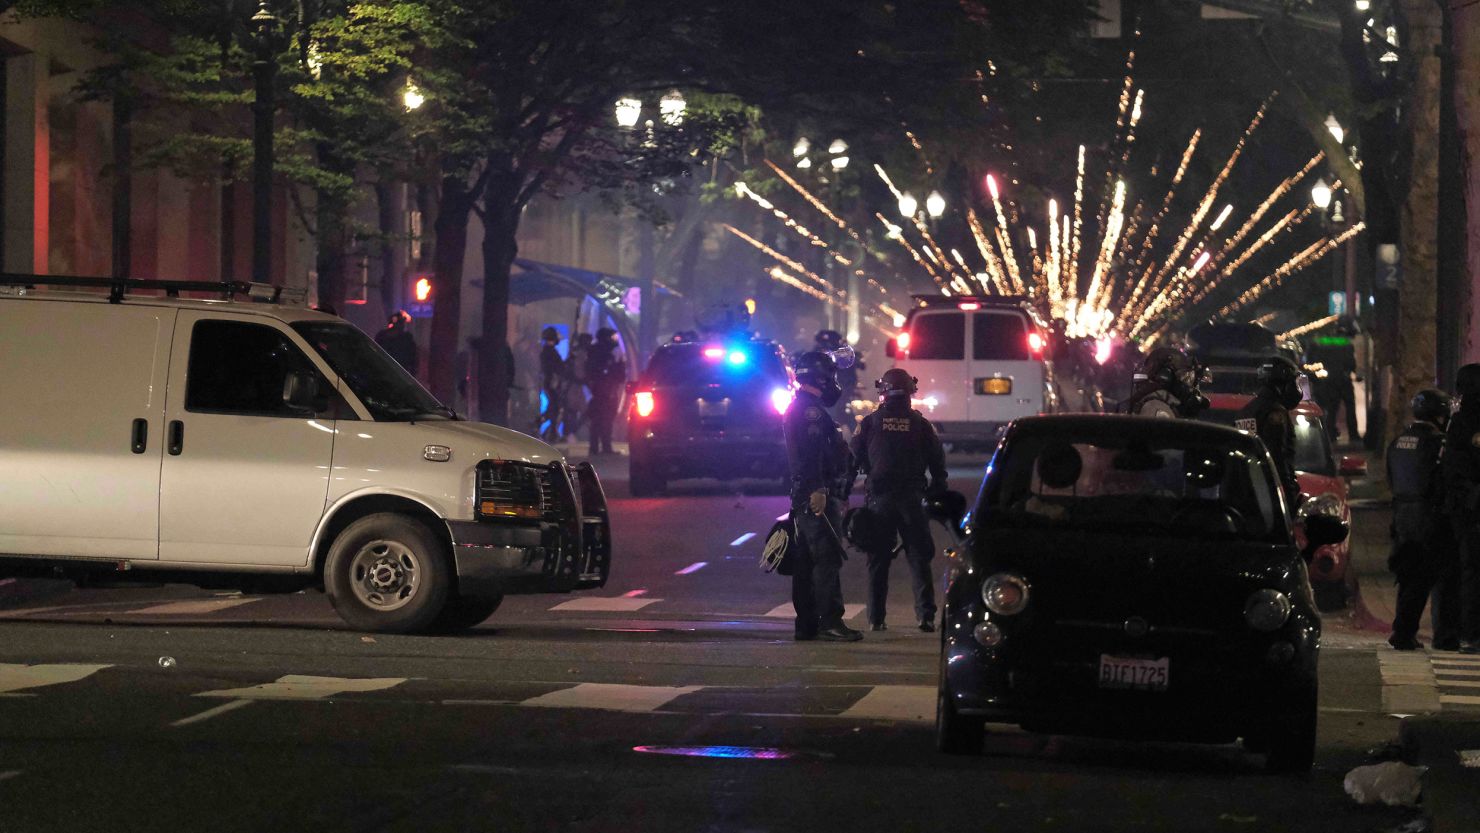 Police clear the streets near the Justice Center after a riot was declared in Portland, Oregon, on Saturday, July 4.